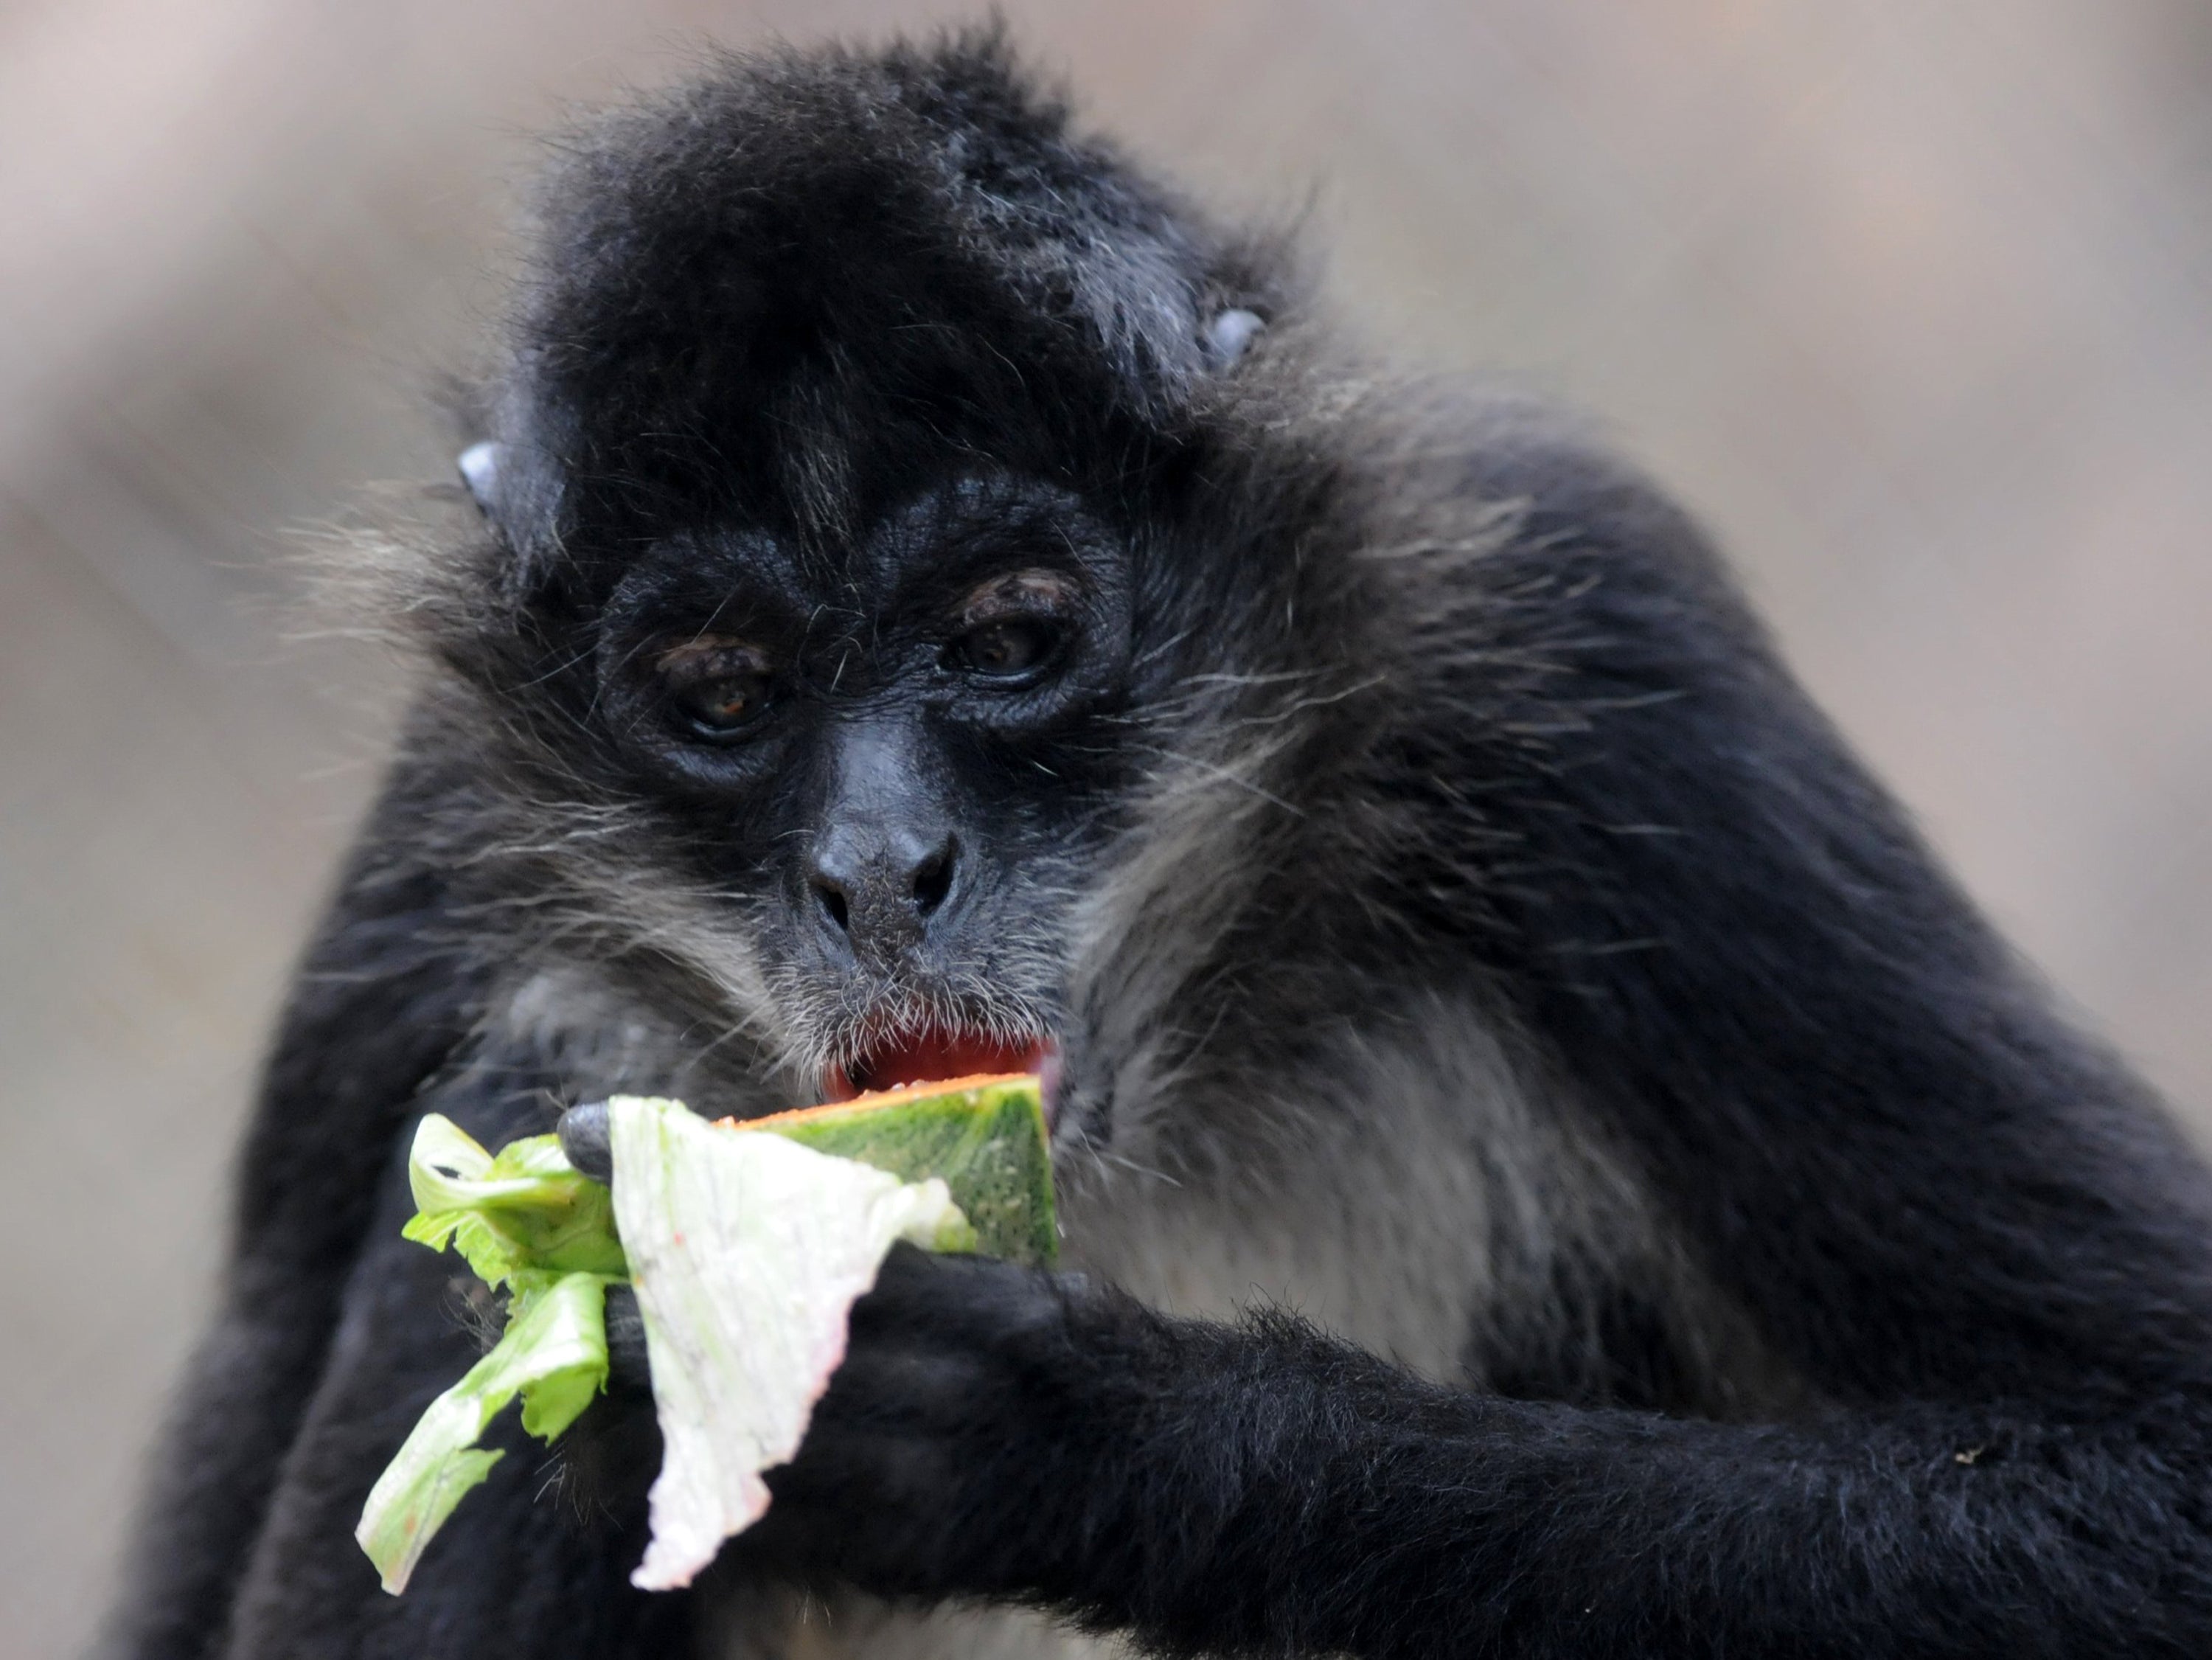 Spider monkeys have been found to seek out fruits which have fermented